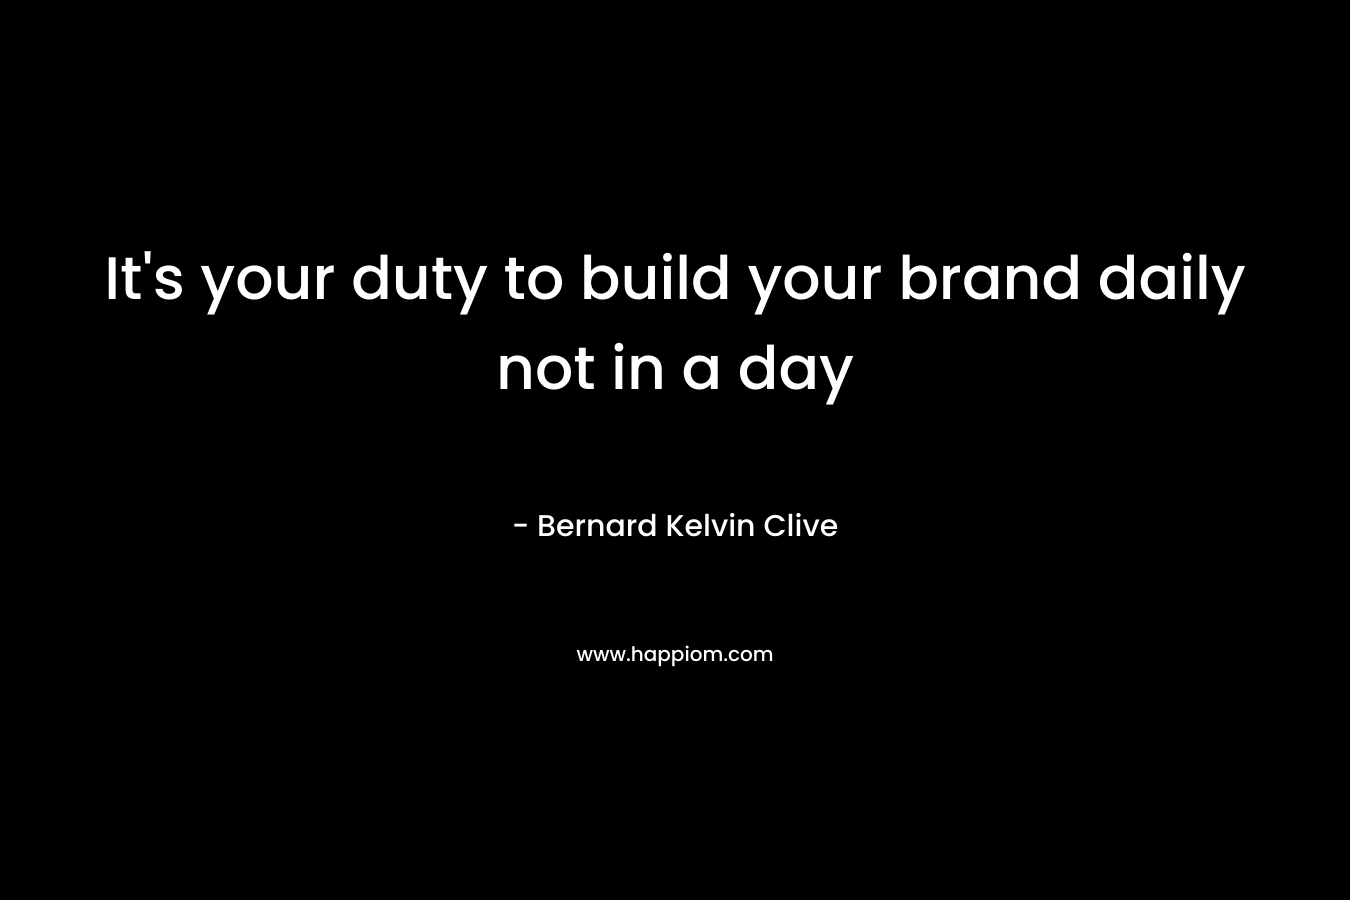 It's your duty to build your brand daily not in a day